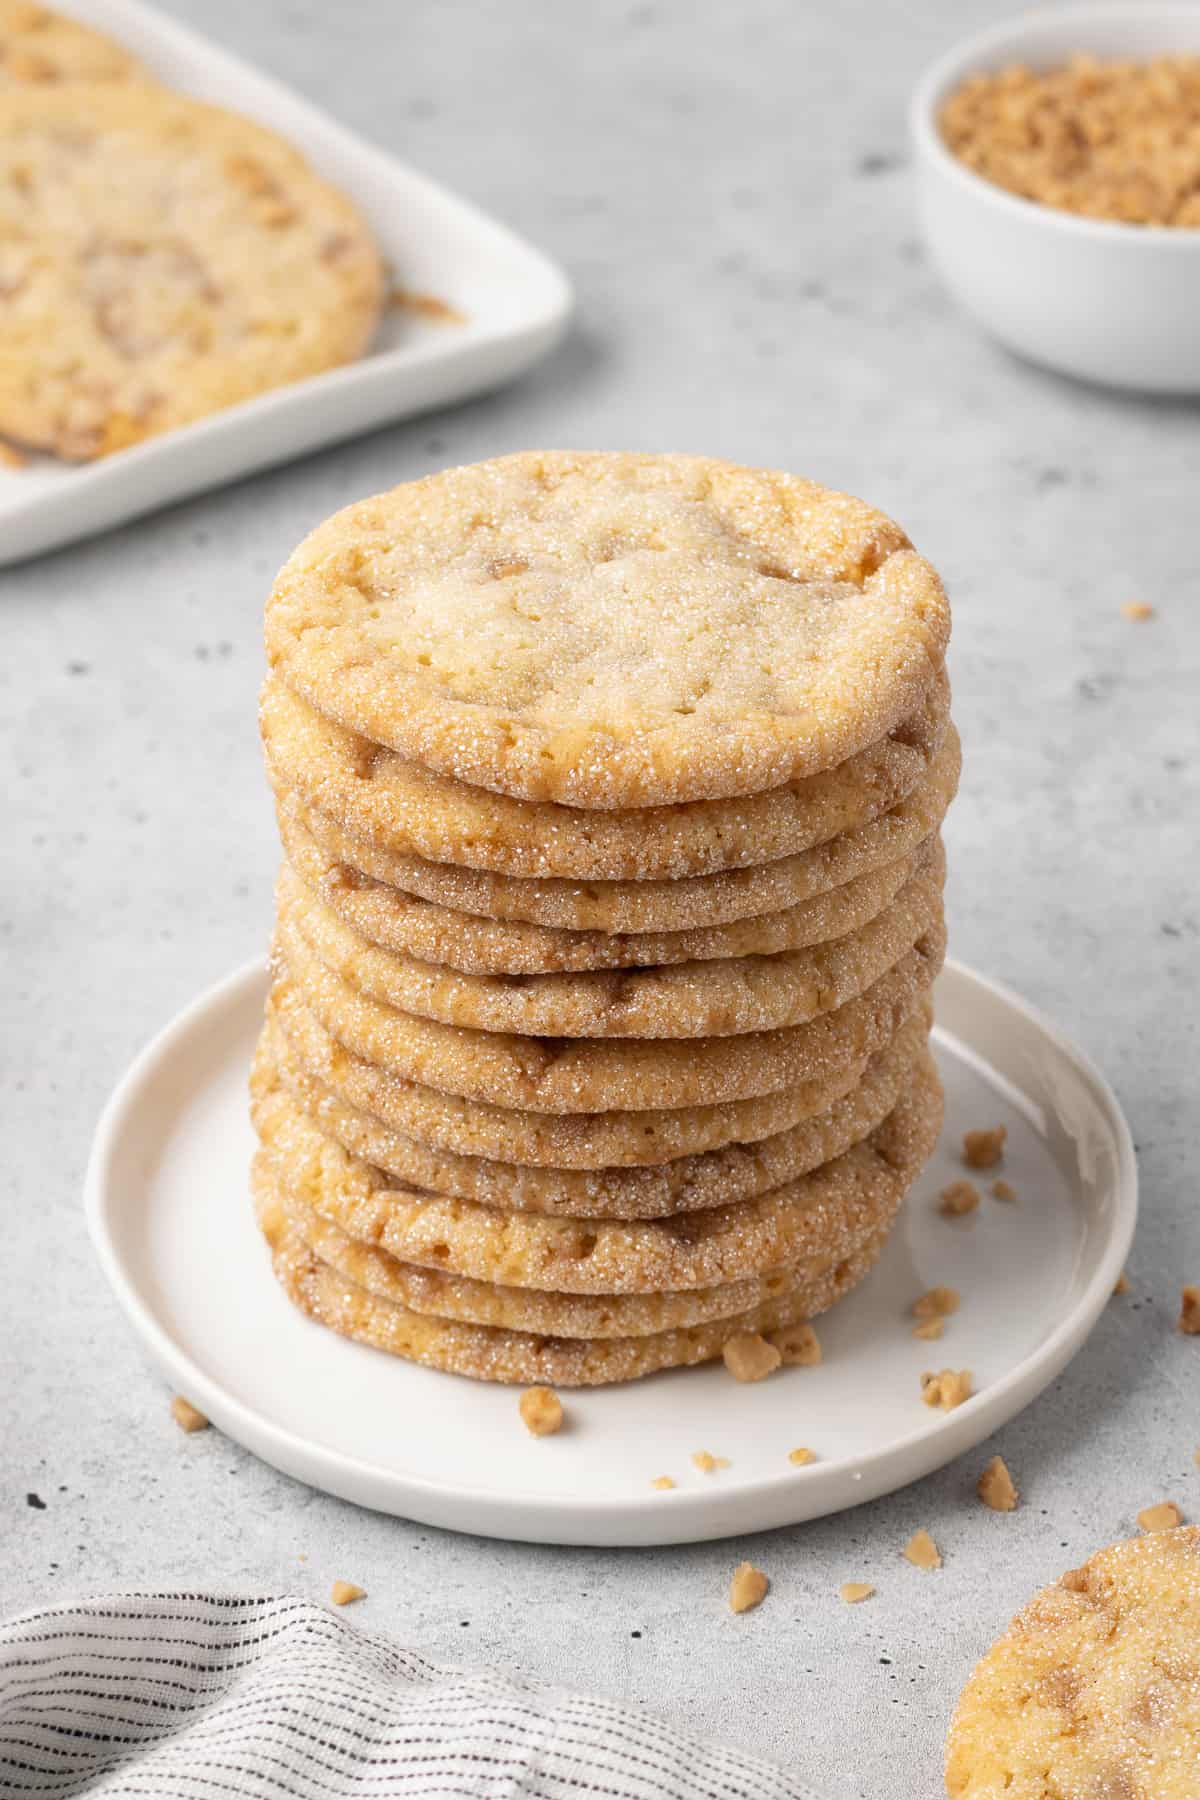 A tall stack of toffee cookies on a small white plate.